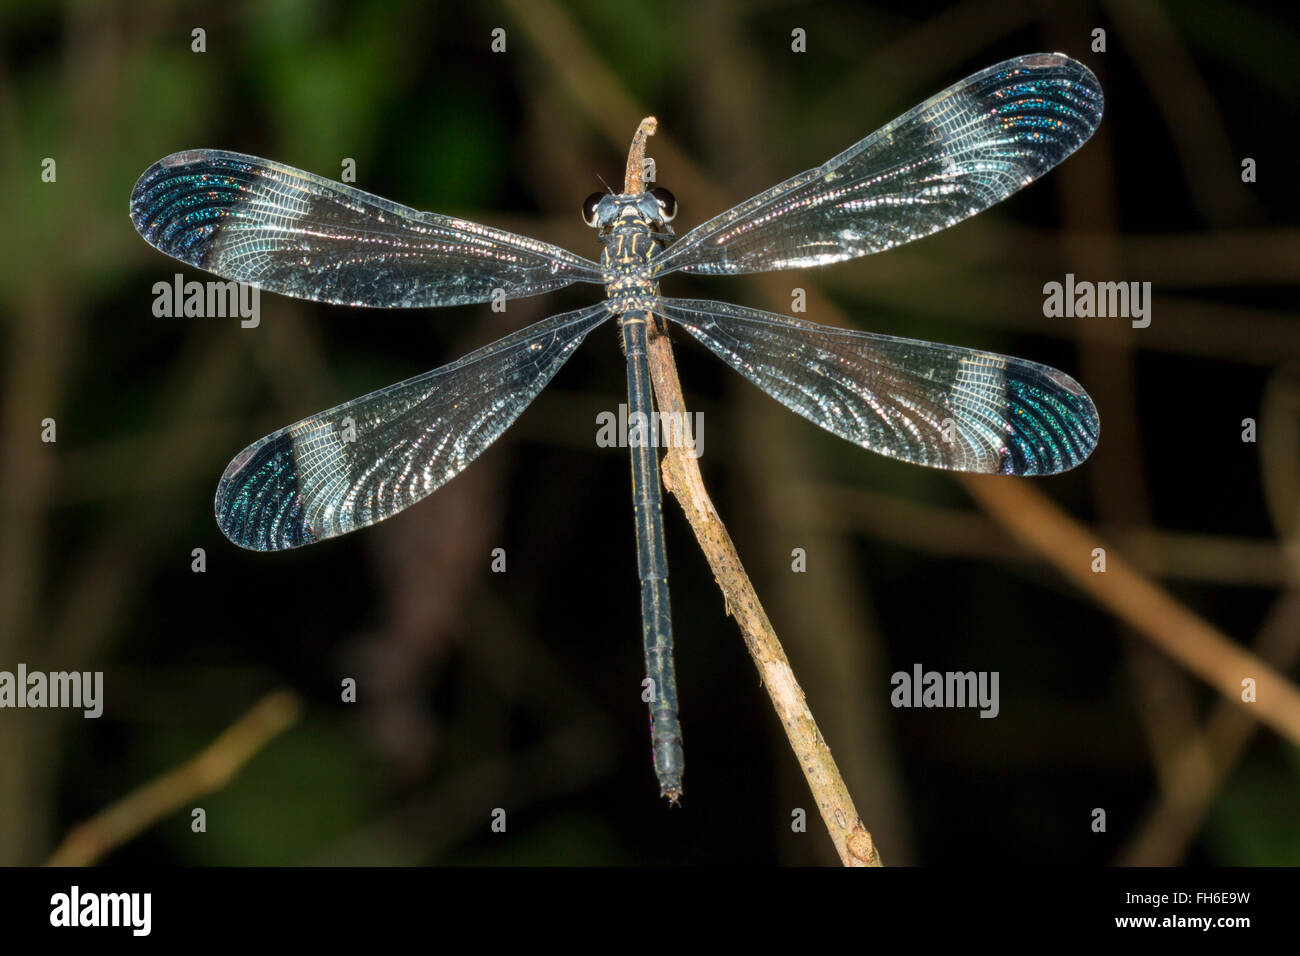 Danselfly (Zygoptera) roosting at night in the rainforest, Pastaza province, Ecuador Stock Photo